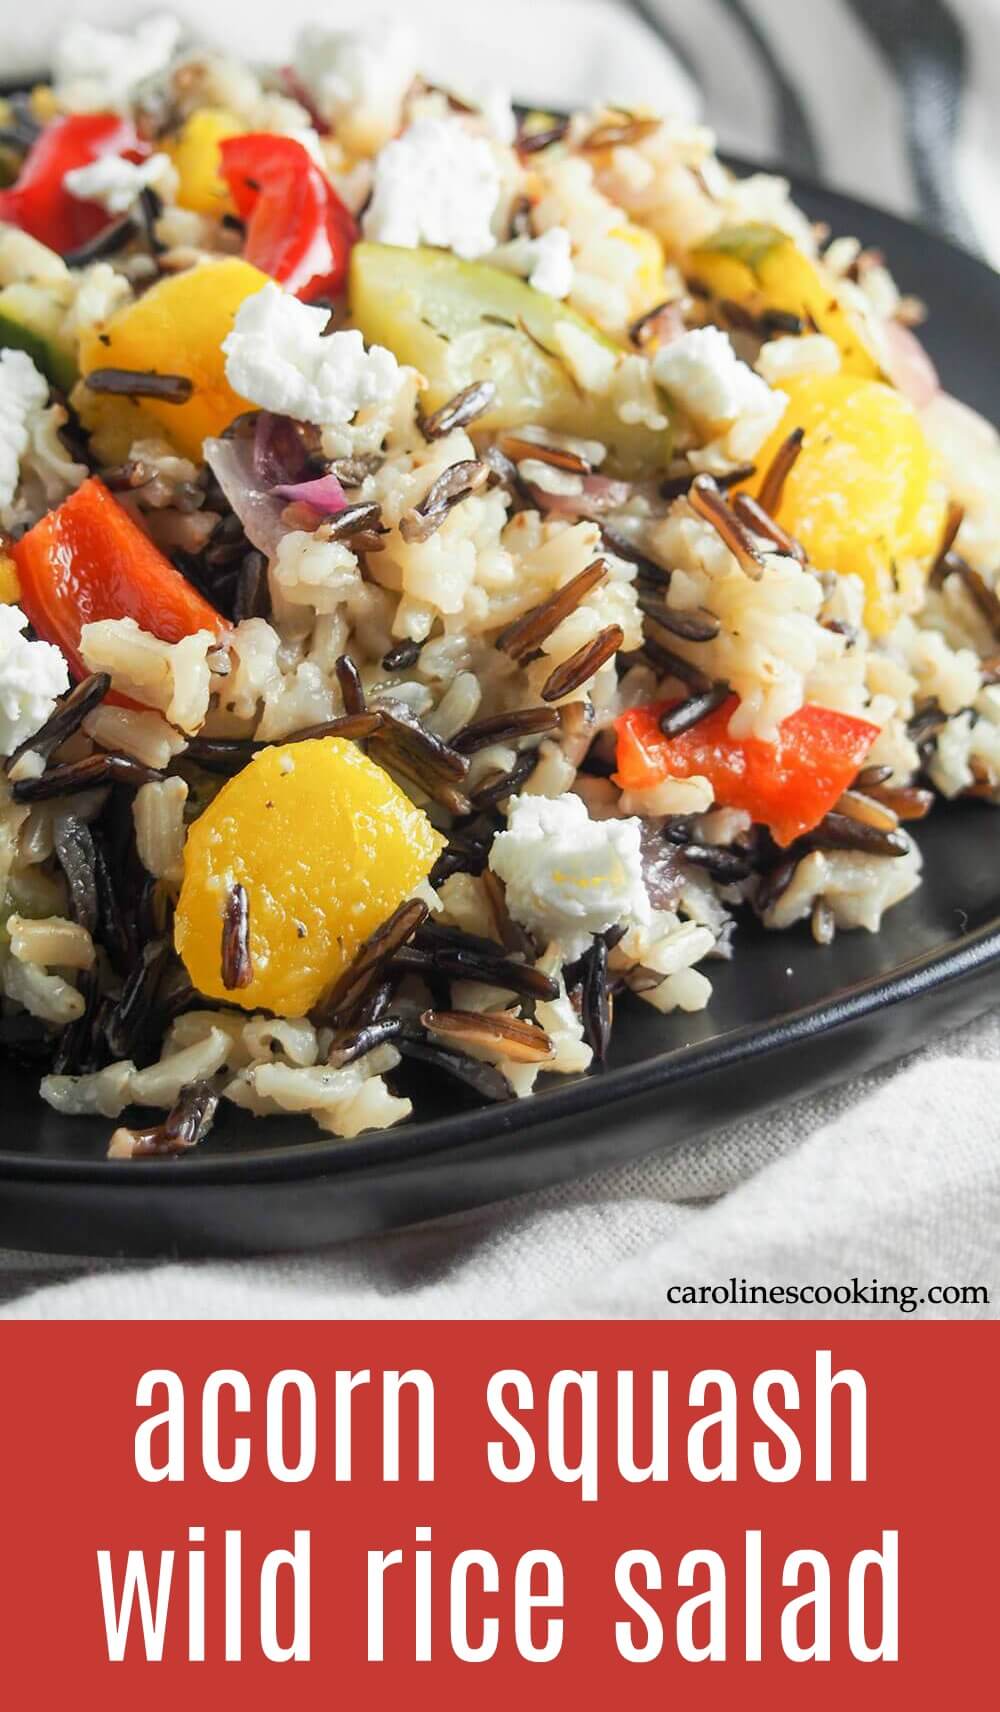 Acorn squash wild rice salad is a delicious vegetarian dish (easily made vegan) made with squash, wild rice and a citrus dressing that makes a great main or side.  An excellent addition to any holiday meal, plus it's great cold for lunch too.  #acornsquash #wildrice #salad #fallrecipe #vegetarian #holidayside